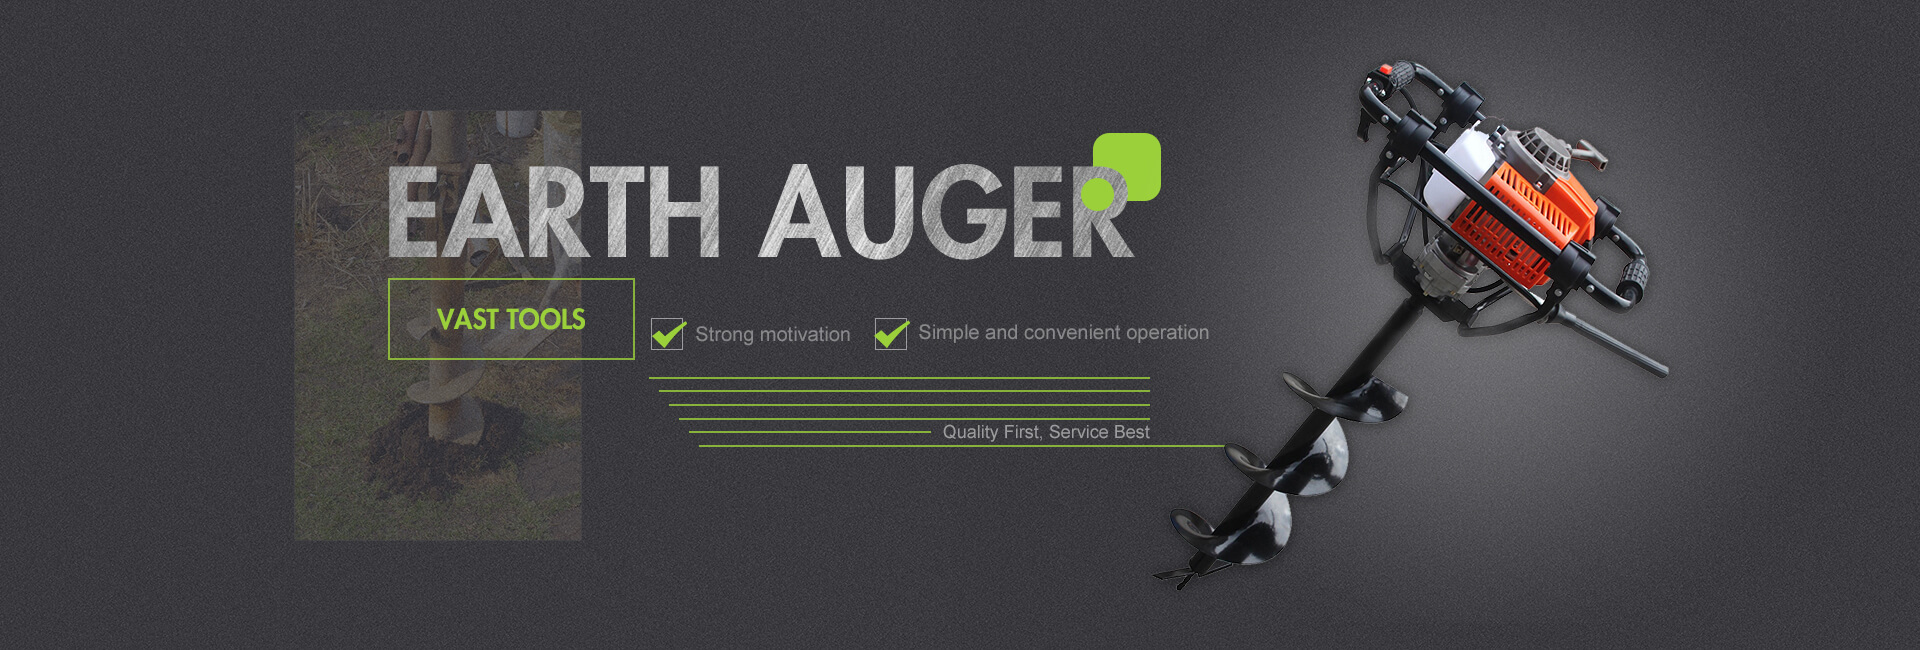 Earth auger